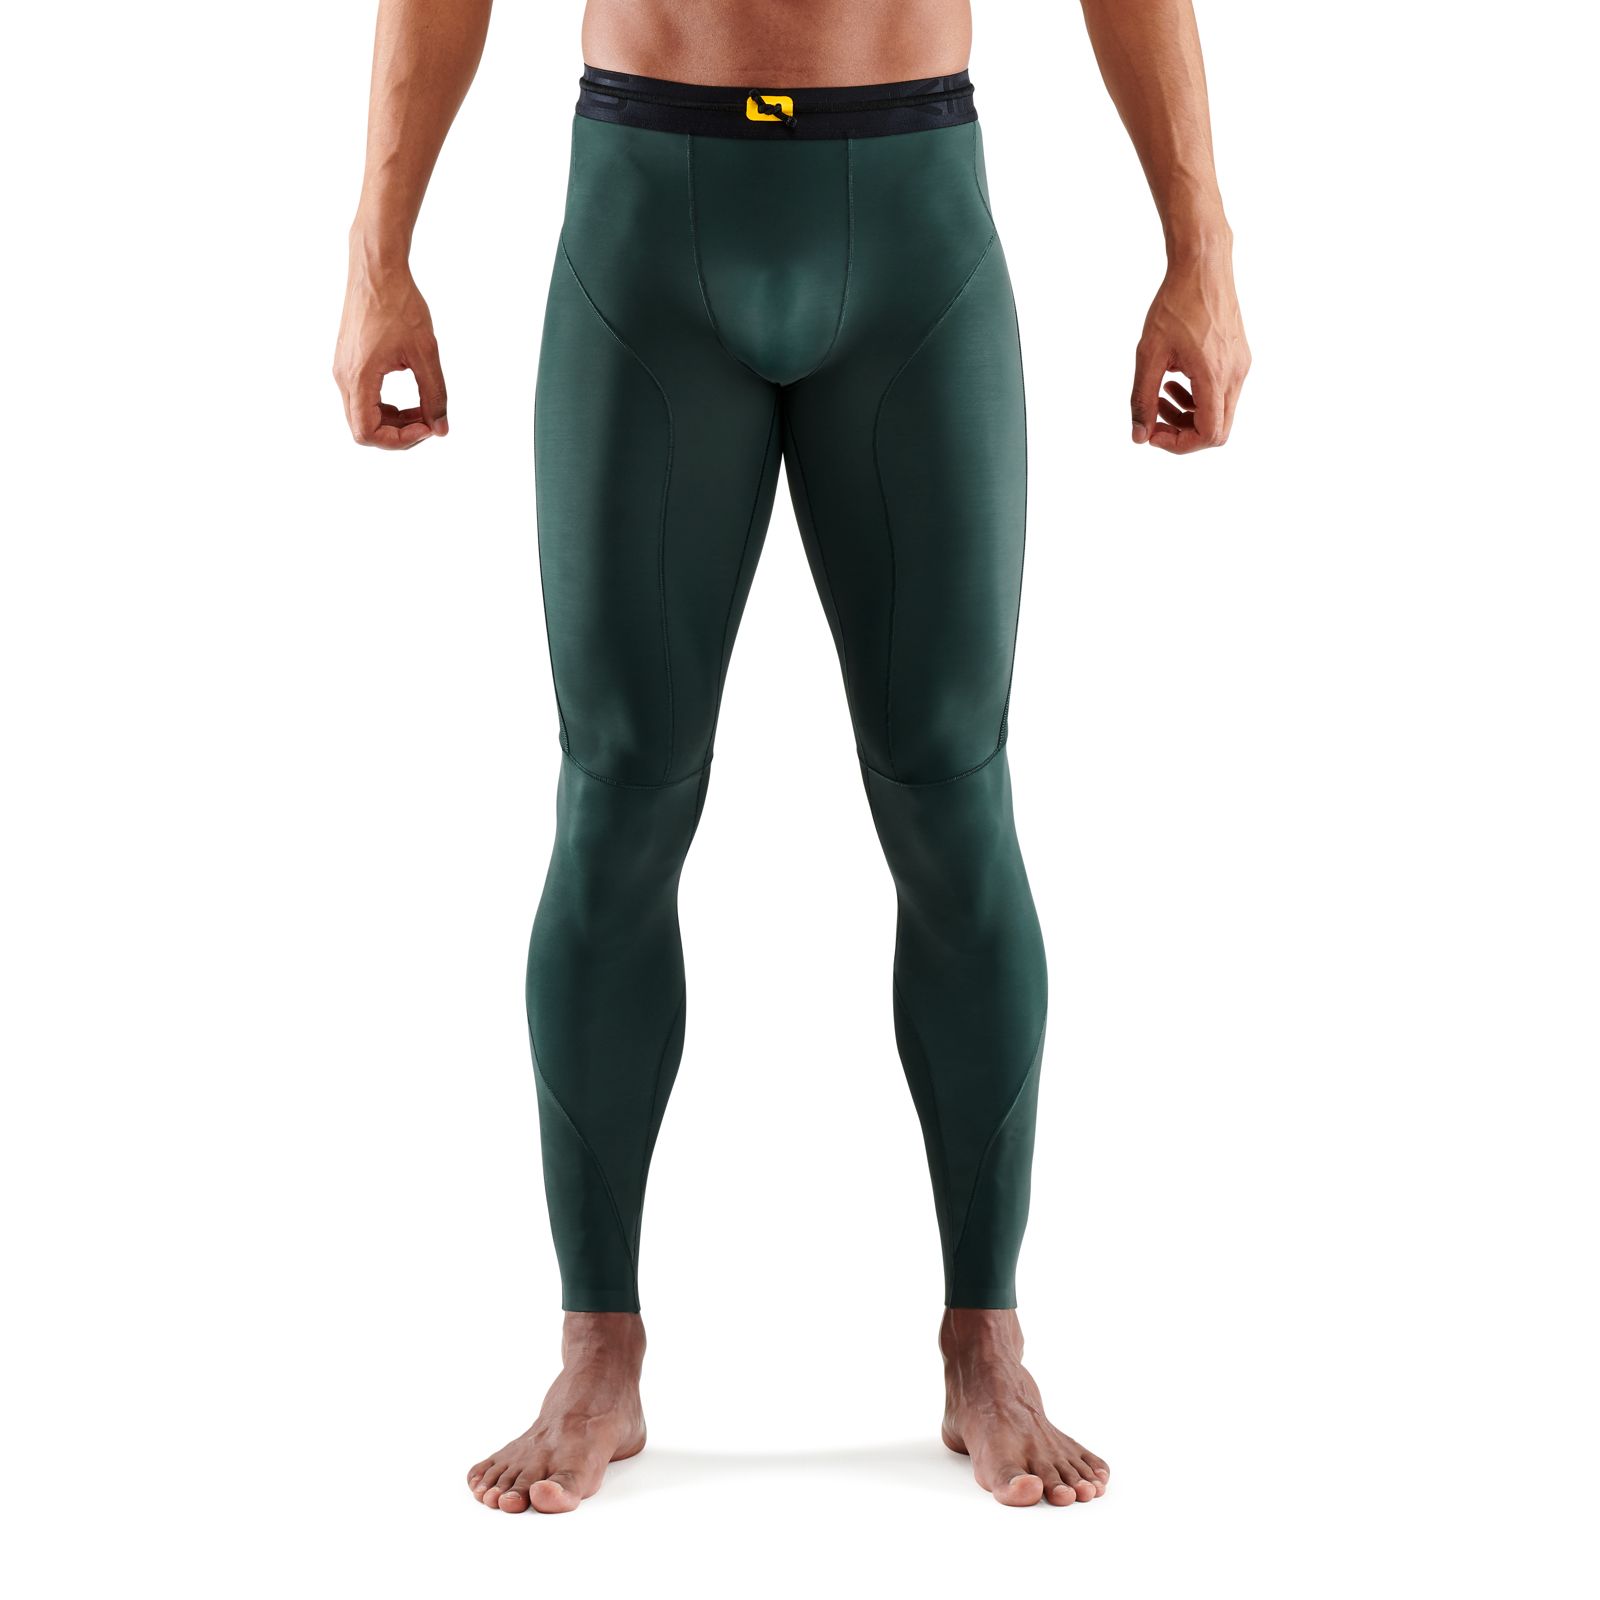 Skins Mens DNAmic Core Long Compression Tights Bottoms Pants Trousers Green 